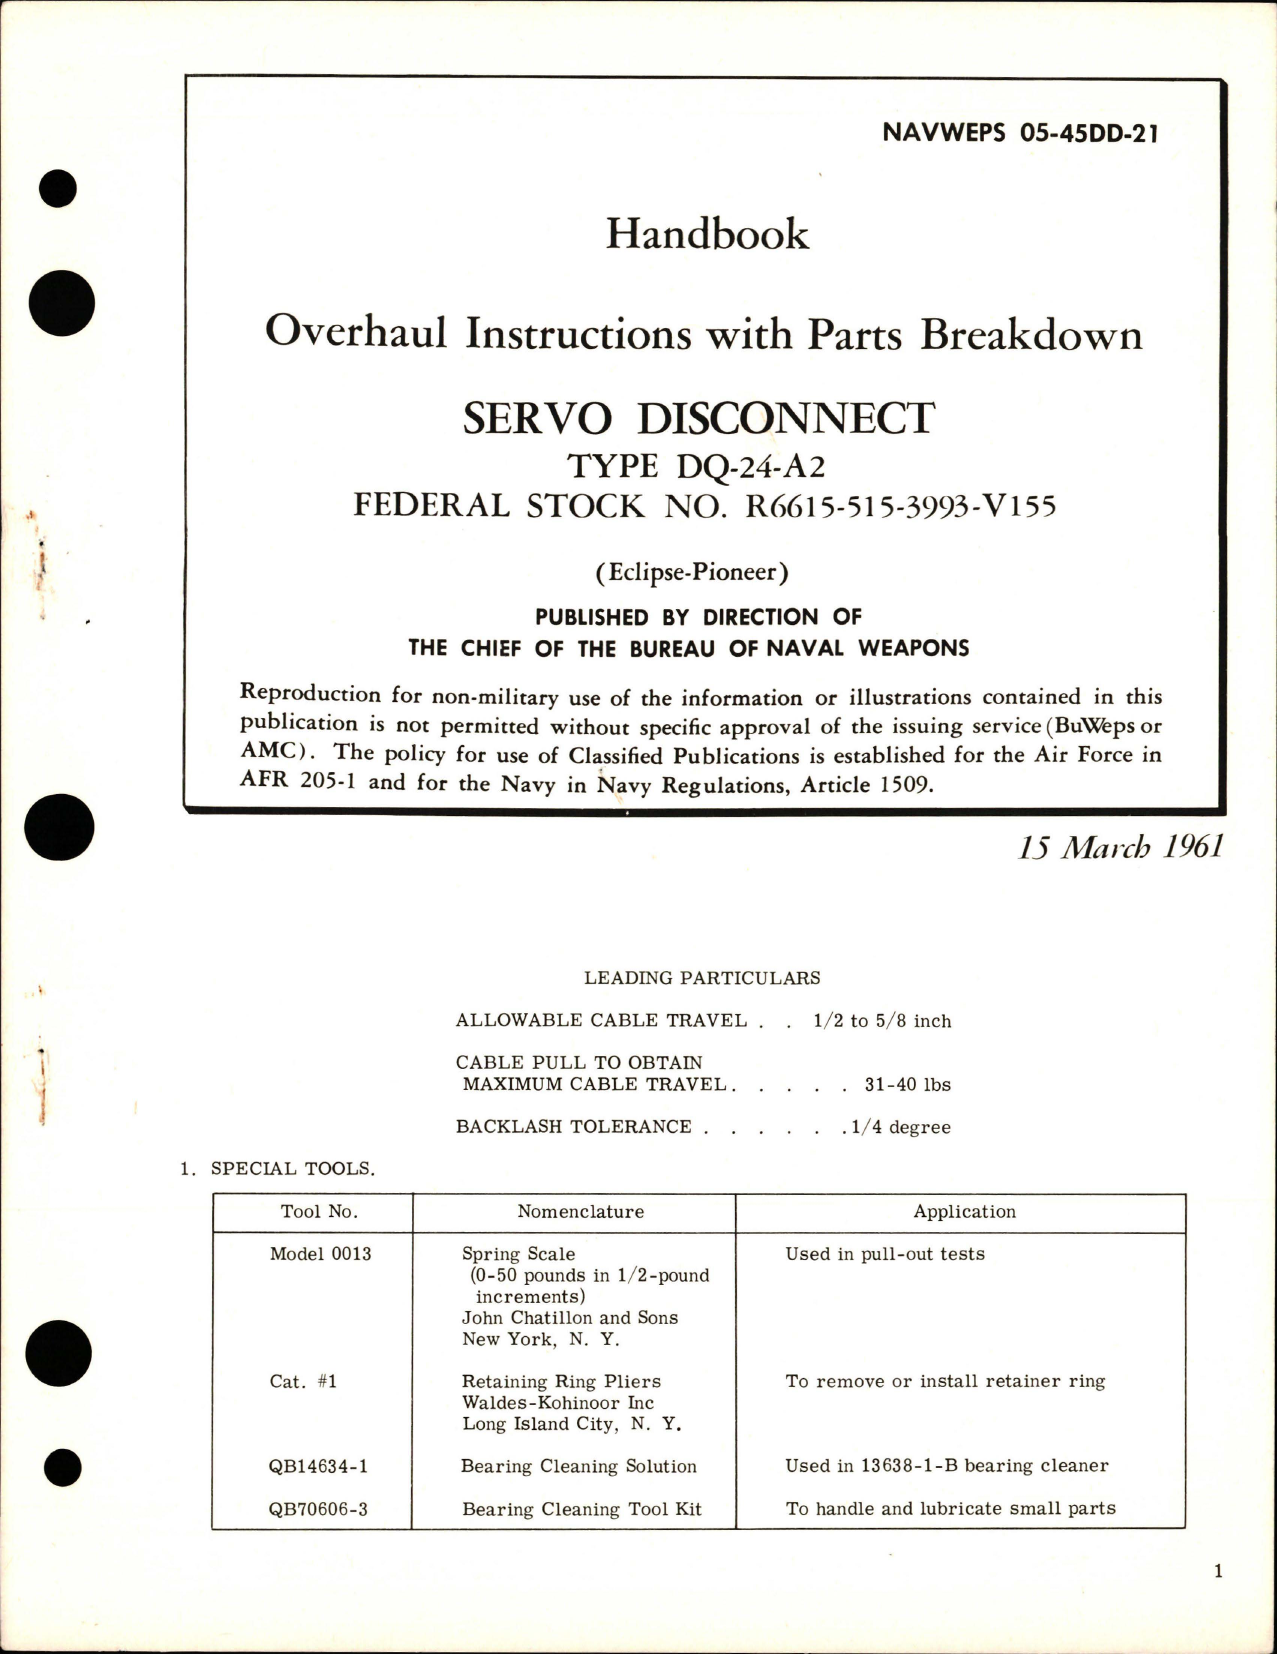 Sample page 1 from AirCorps Library document: Overhaul Instructions with Parts for Servo Disconnect - Type DQ-24-A2